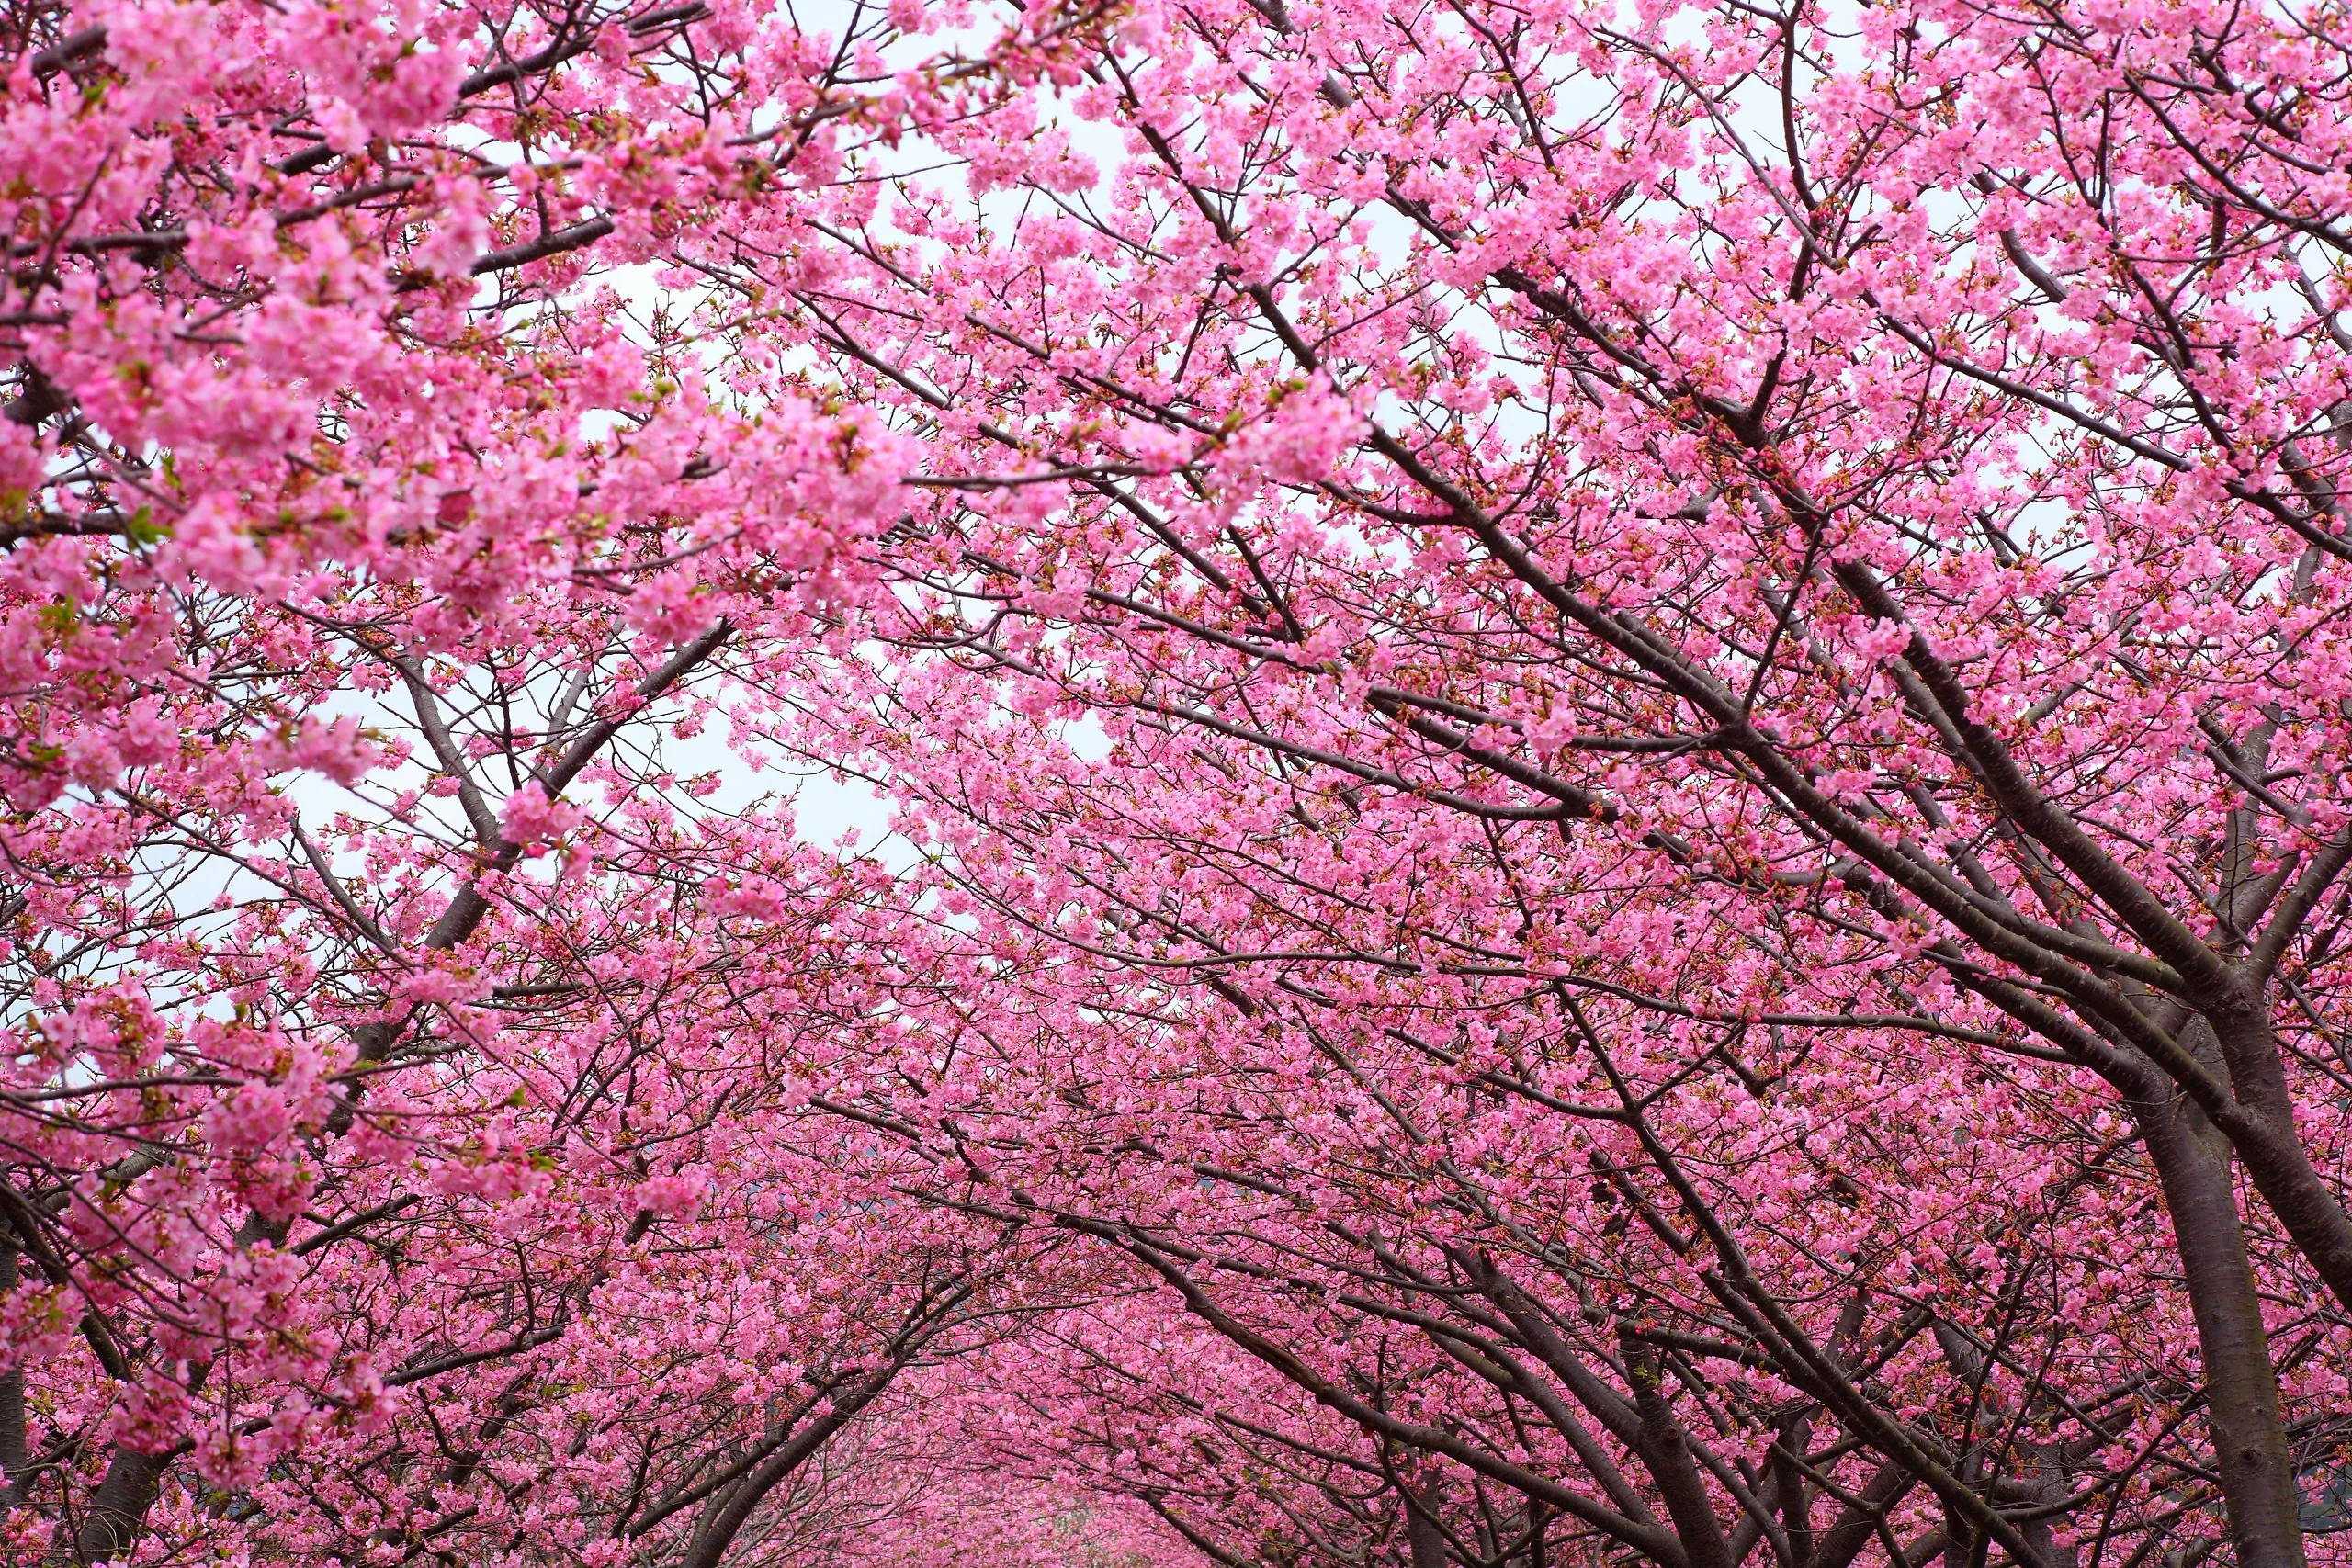 Early blooming of cherry blossoms concerns climate experts - The